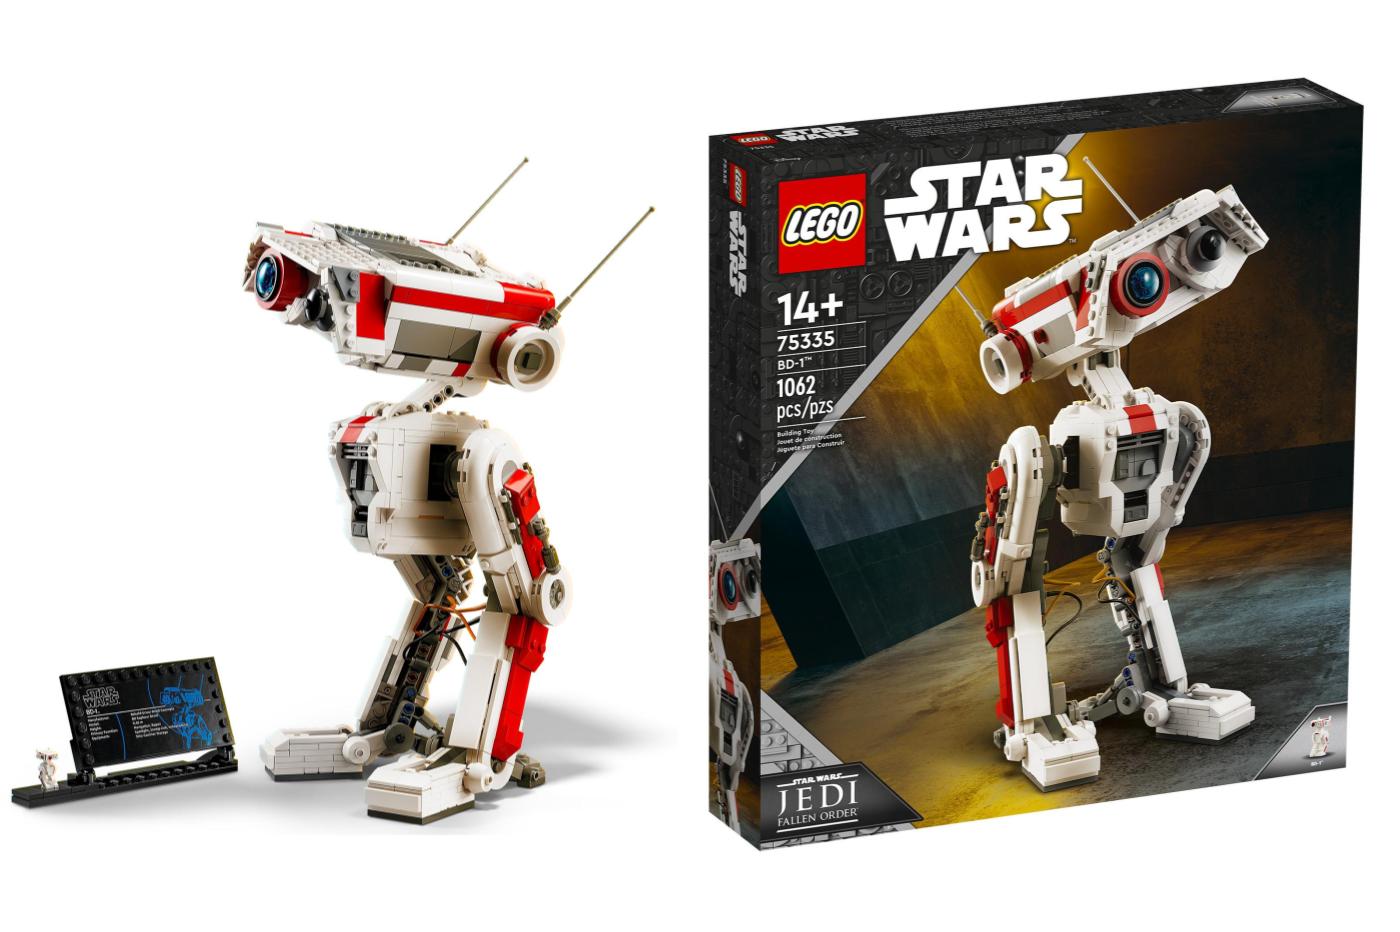 Two images of the new Star Wars Jedi droid BD-1 LEGO set.